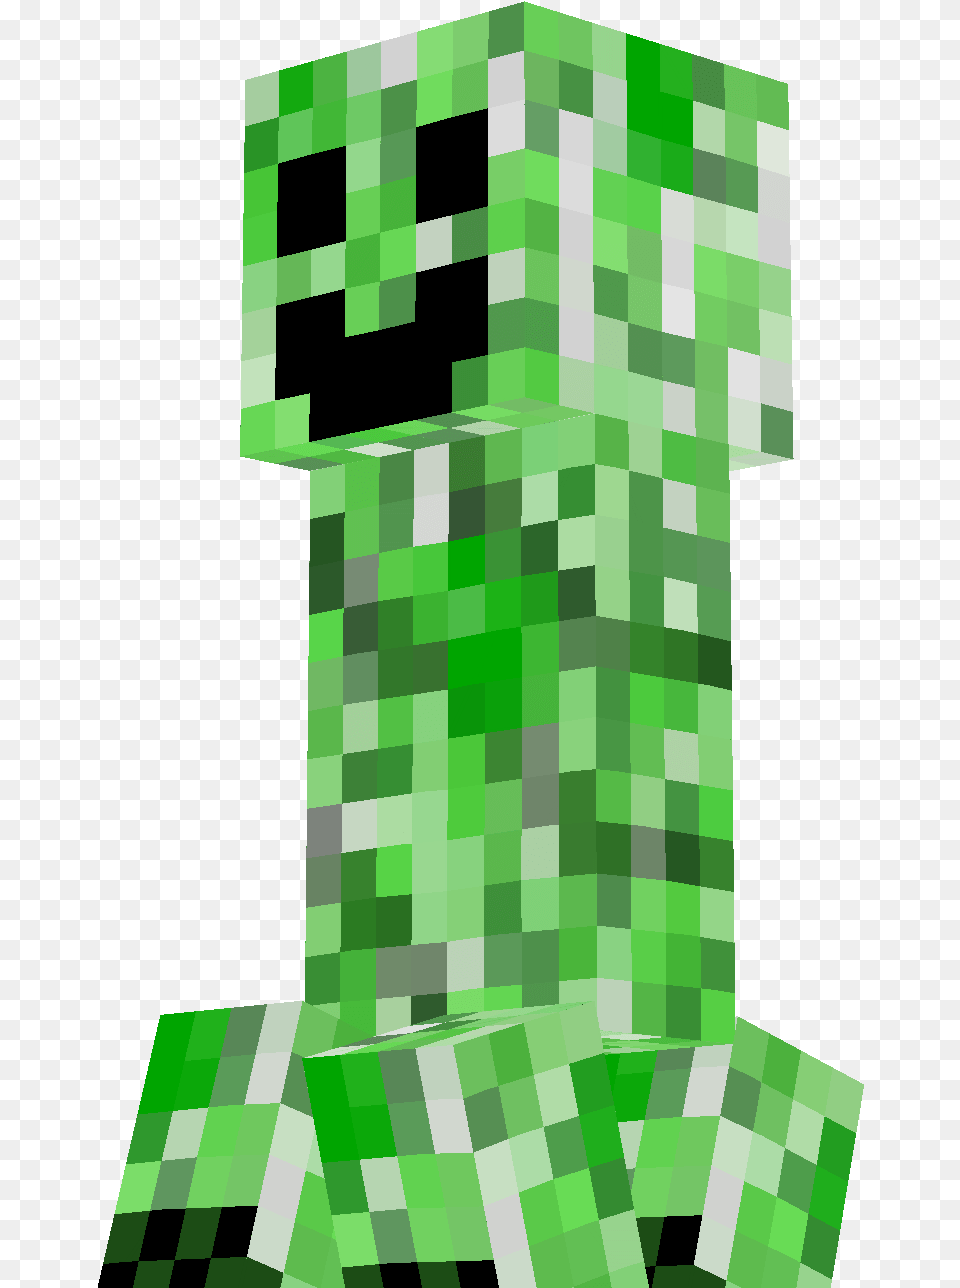 Happy Creeper Photo Minecraft Creeper, Green, Chess, Game, Accessories Png Image